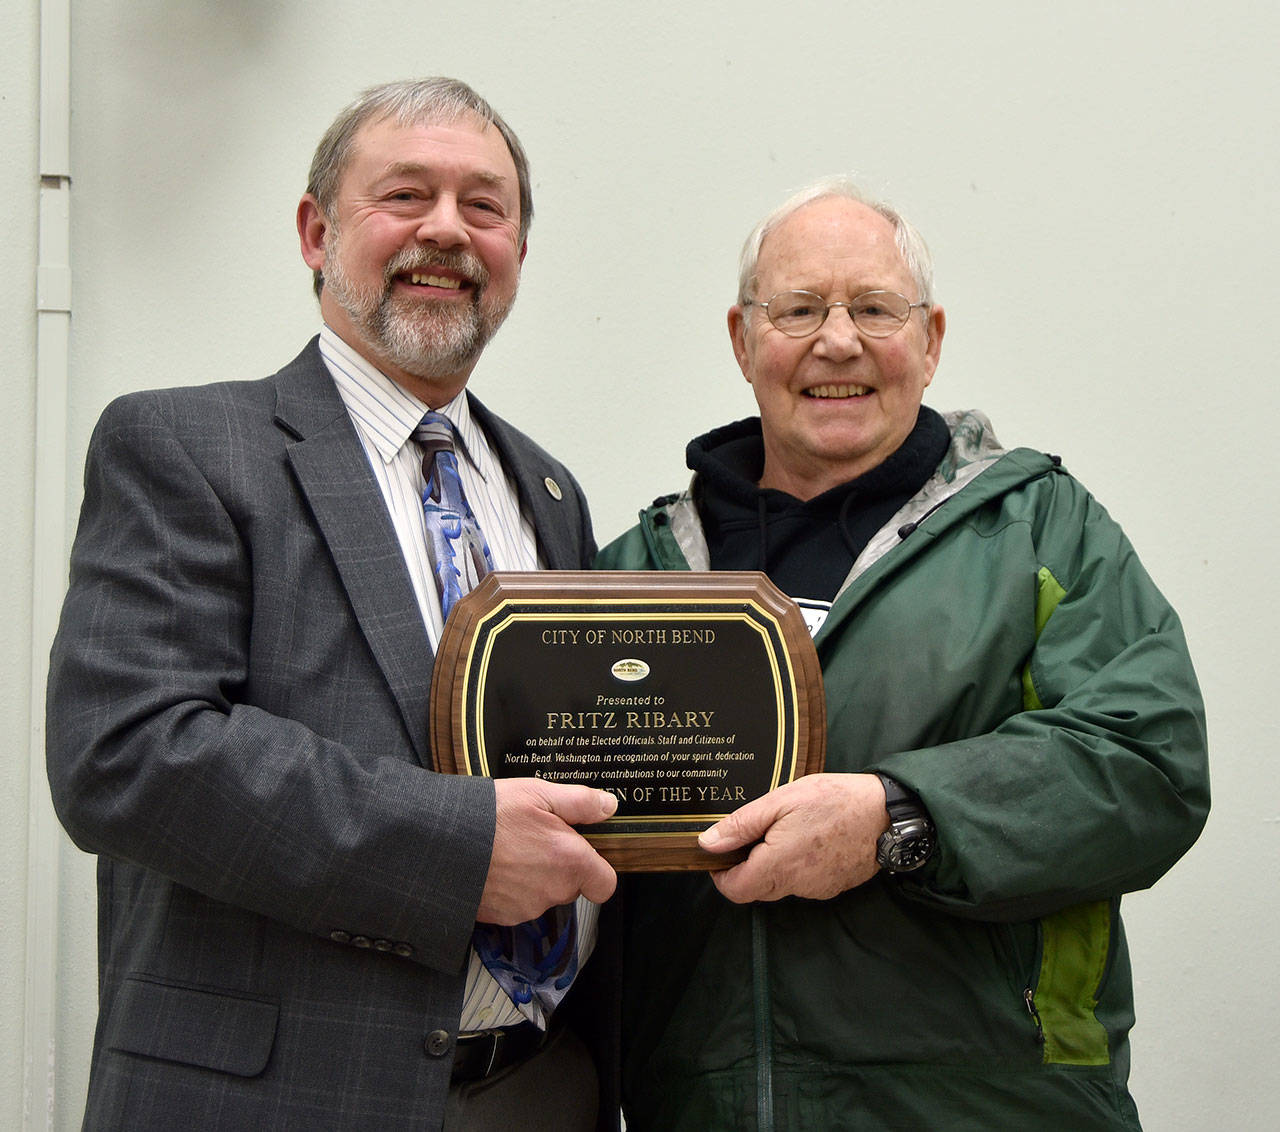 North Bend Mayor Ken Hearing, right, congratulates Fritz Ribary, who has been named the 2018 North Bend Citizen of the Year. (Carol Ladwig/Staff Photo)